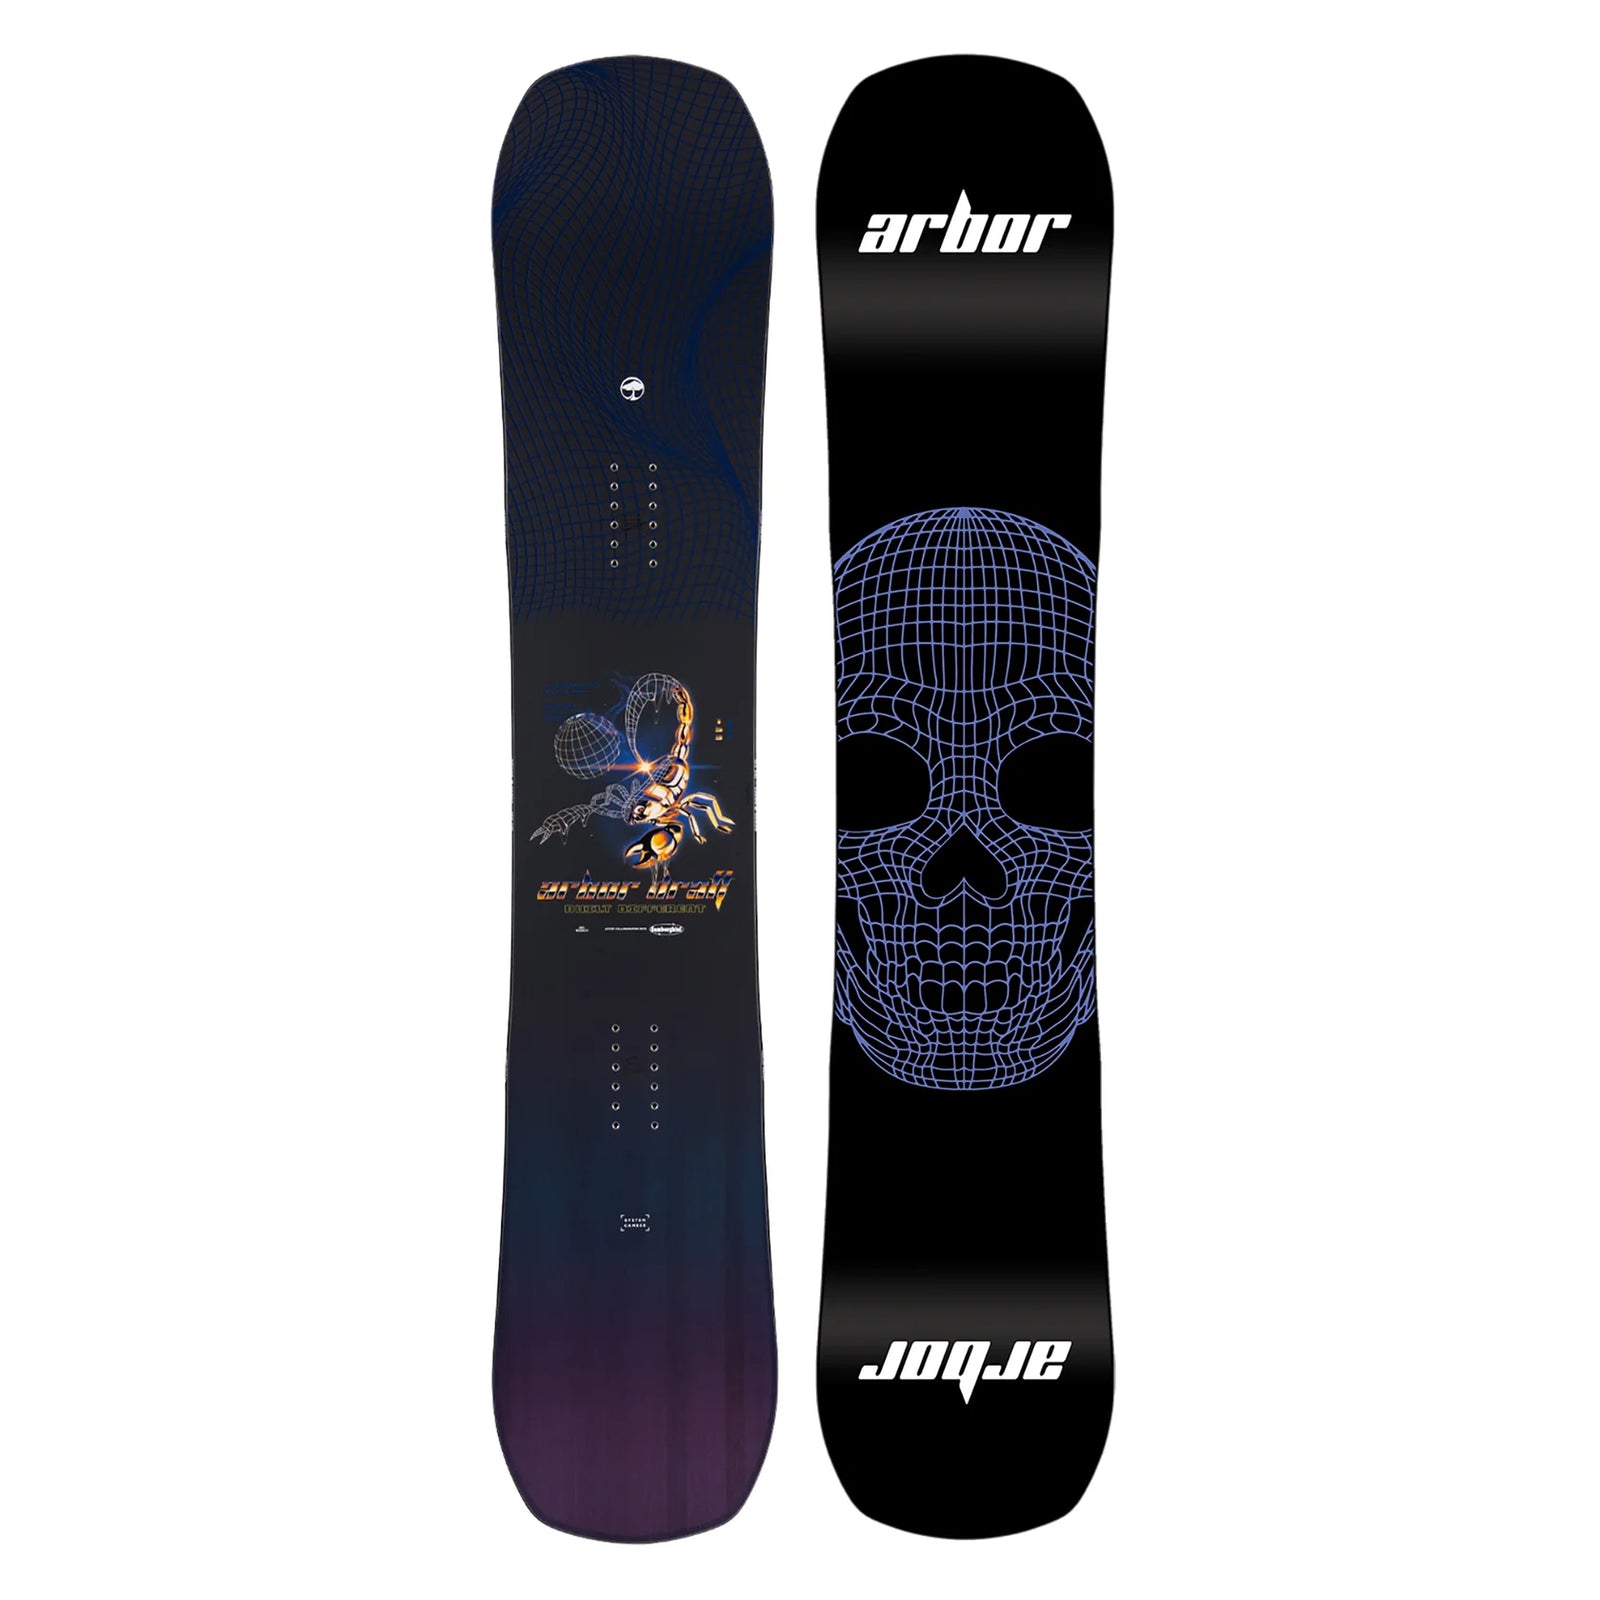 23/24 Snowboards Page 2 - Board of Provo